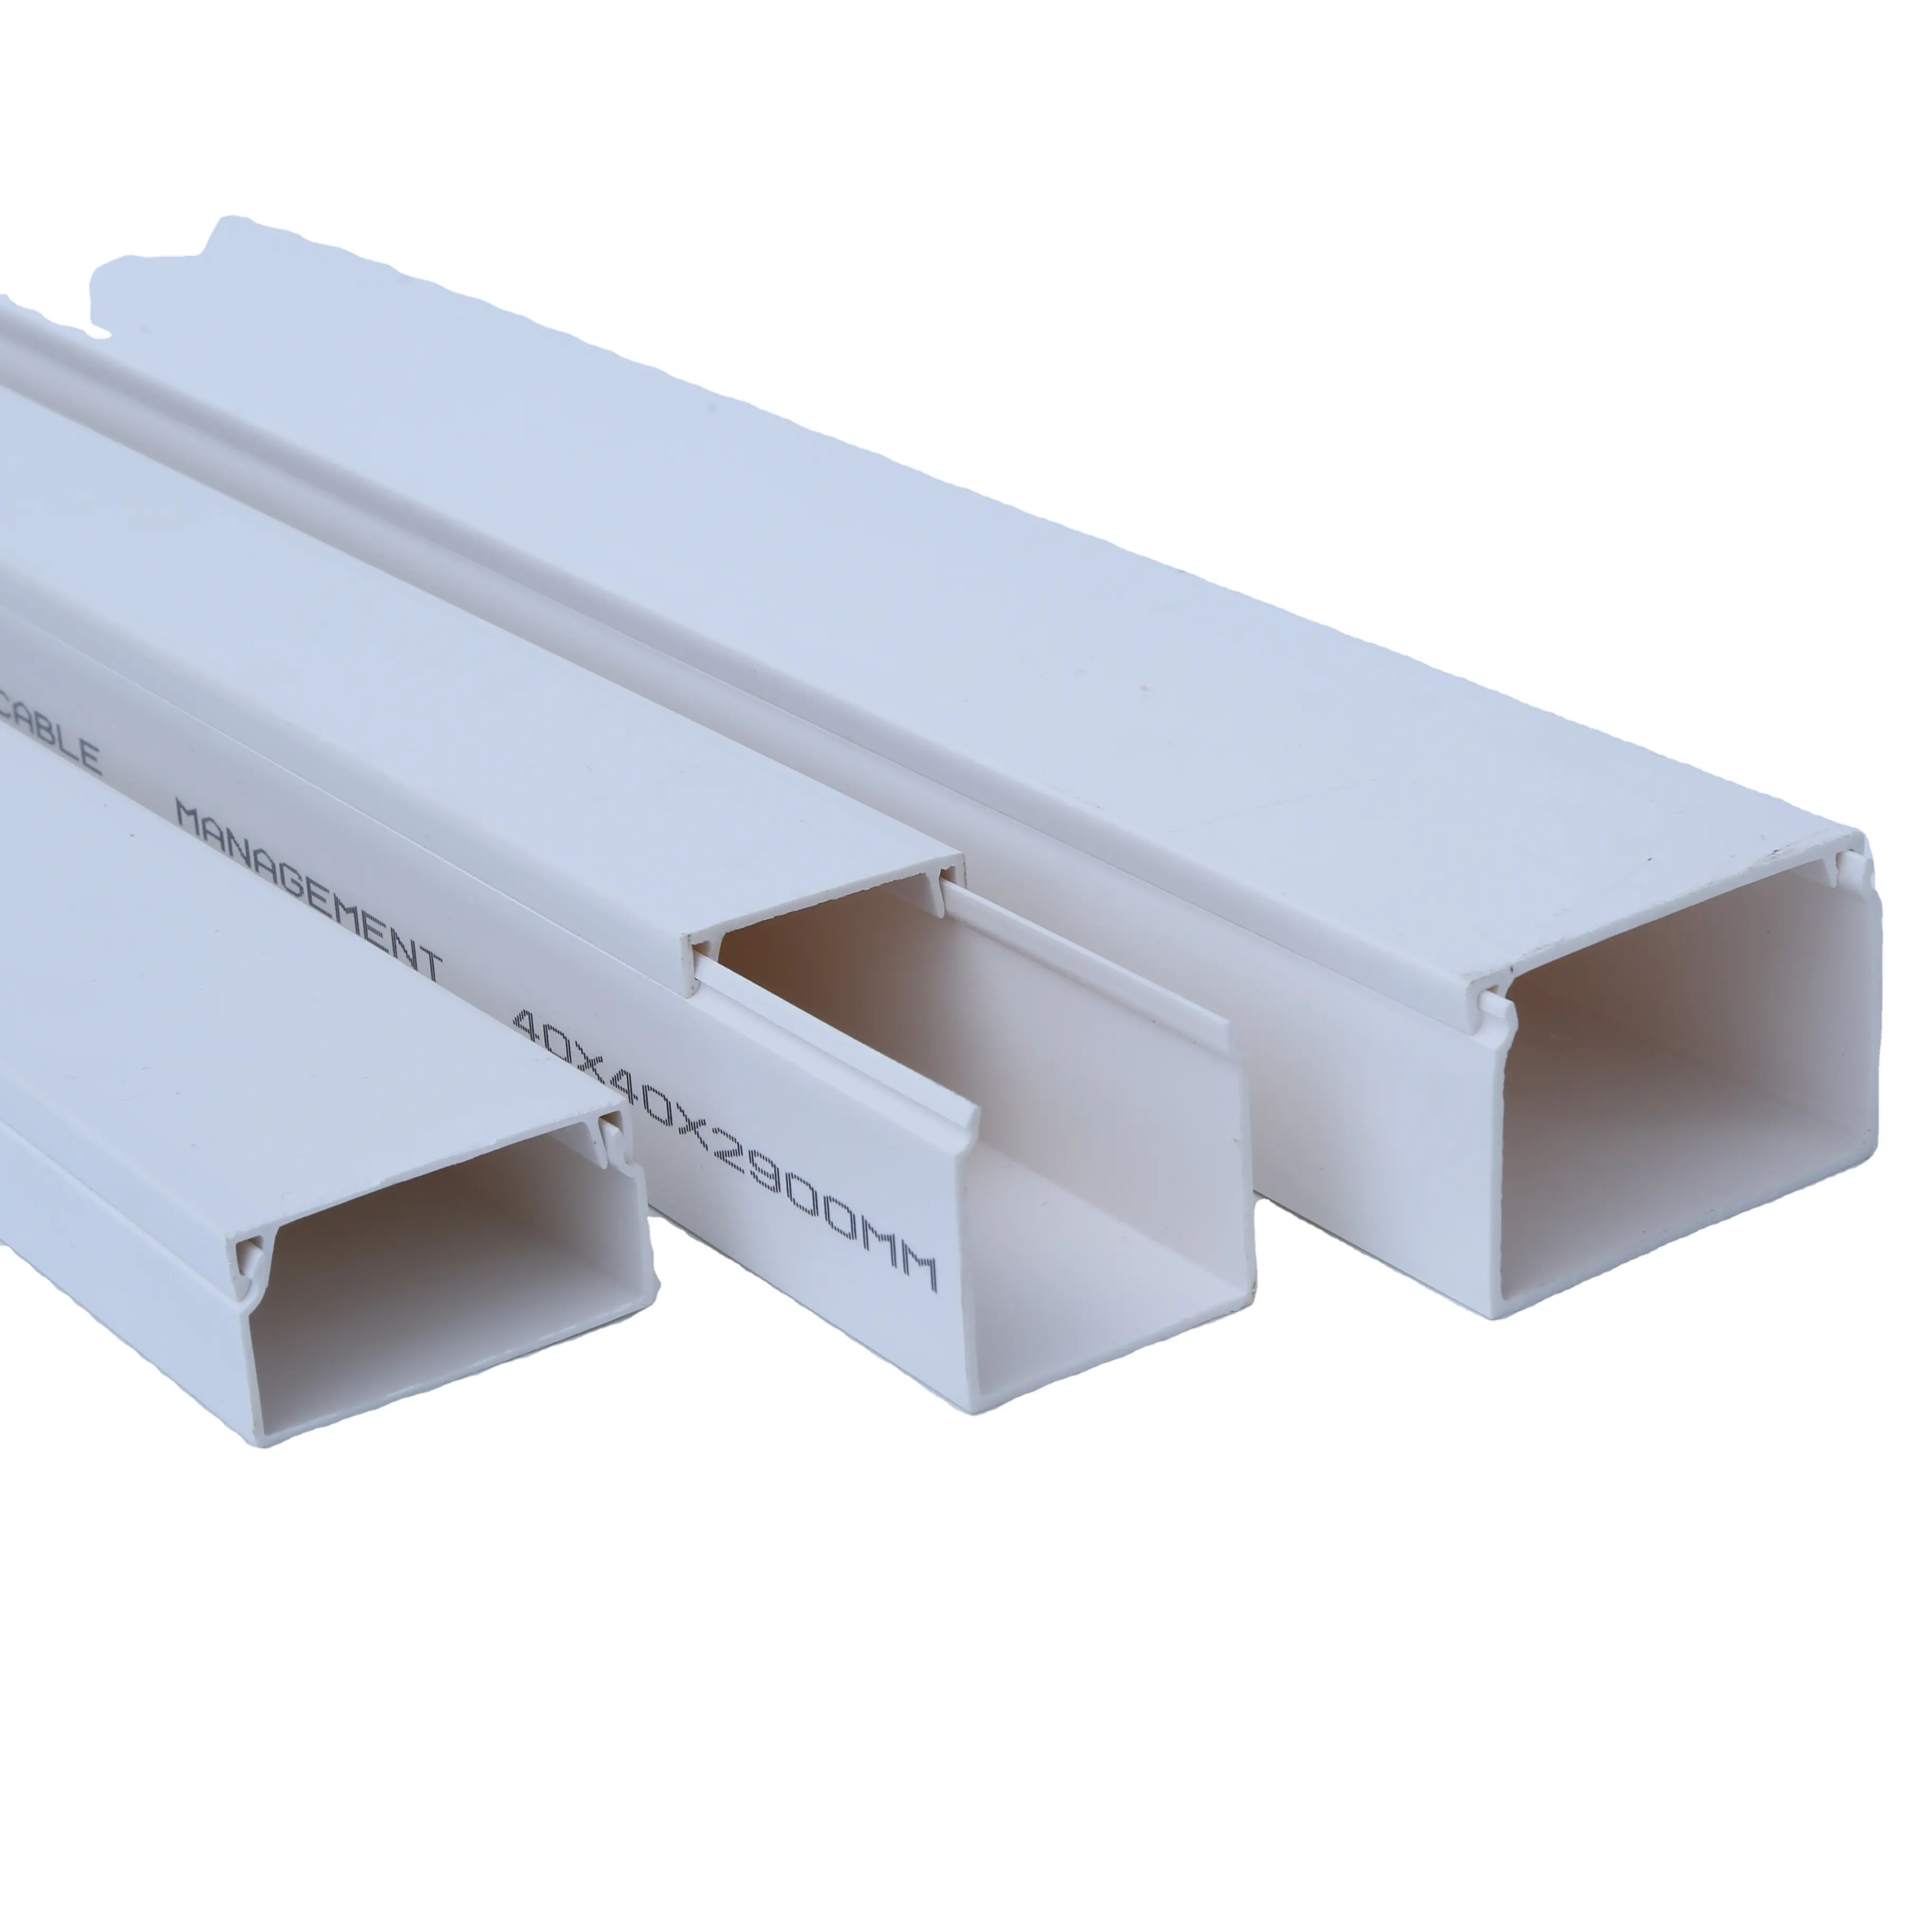 G&N PVC Cable Trunk Factory pvc Cable Trunking Adhesive with PVC Trunking Accessories